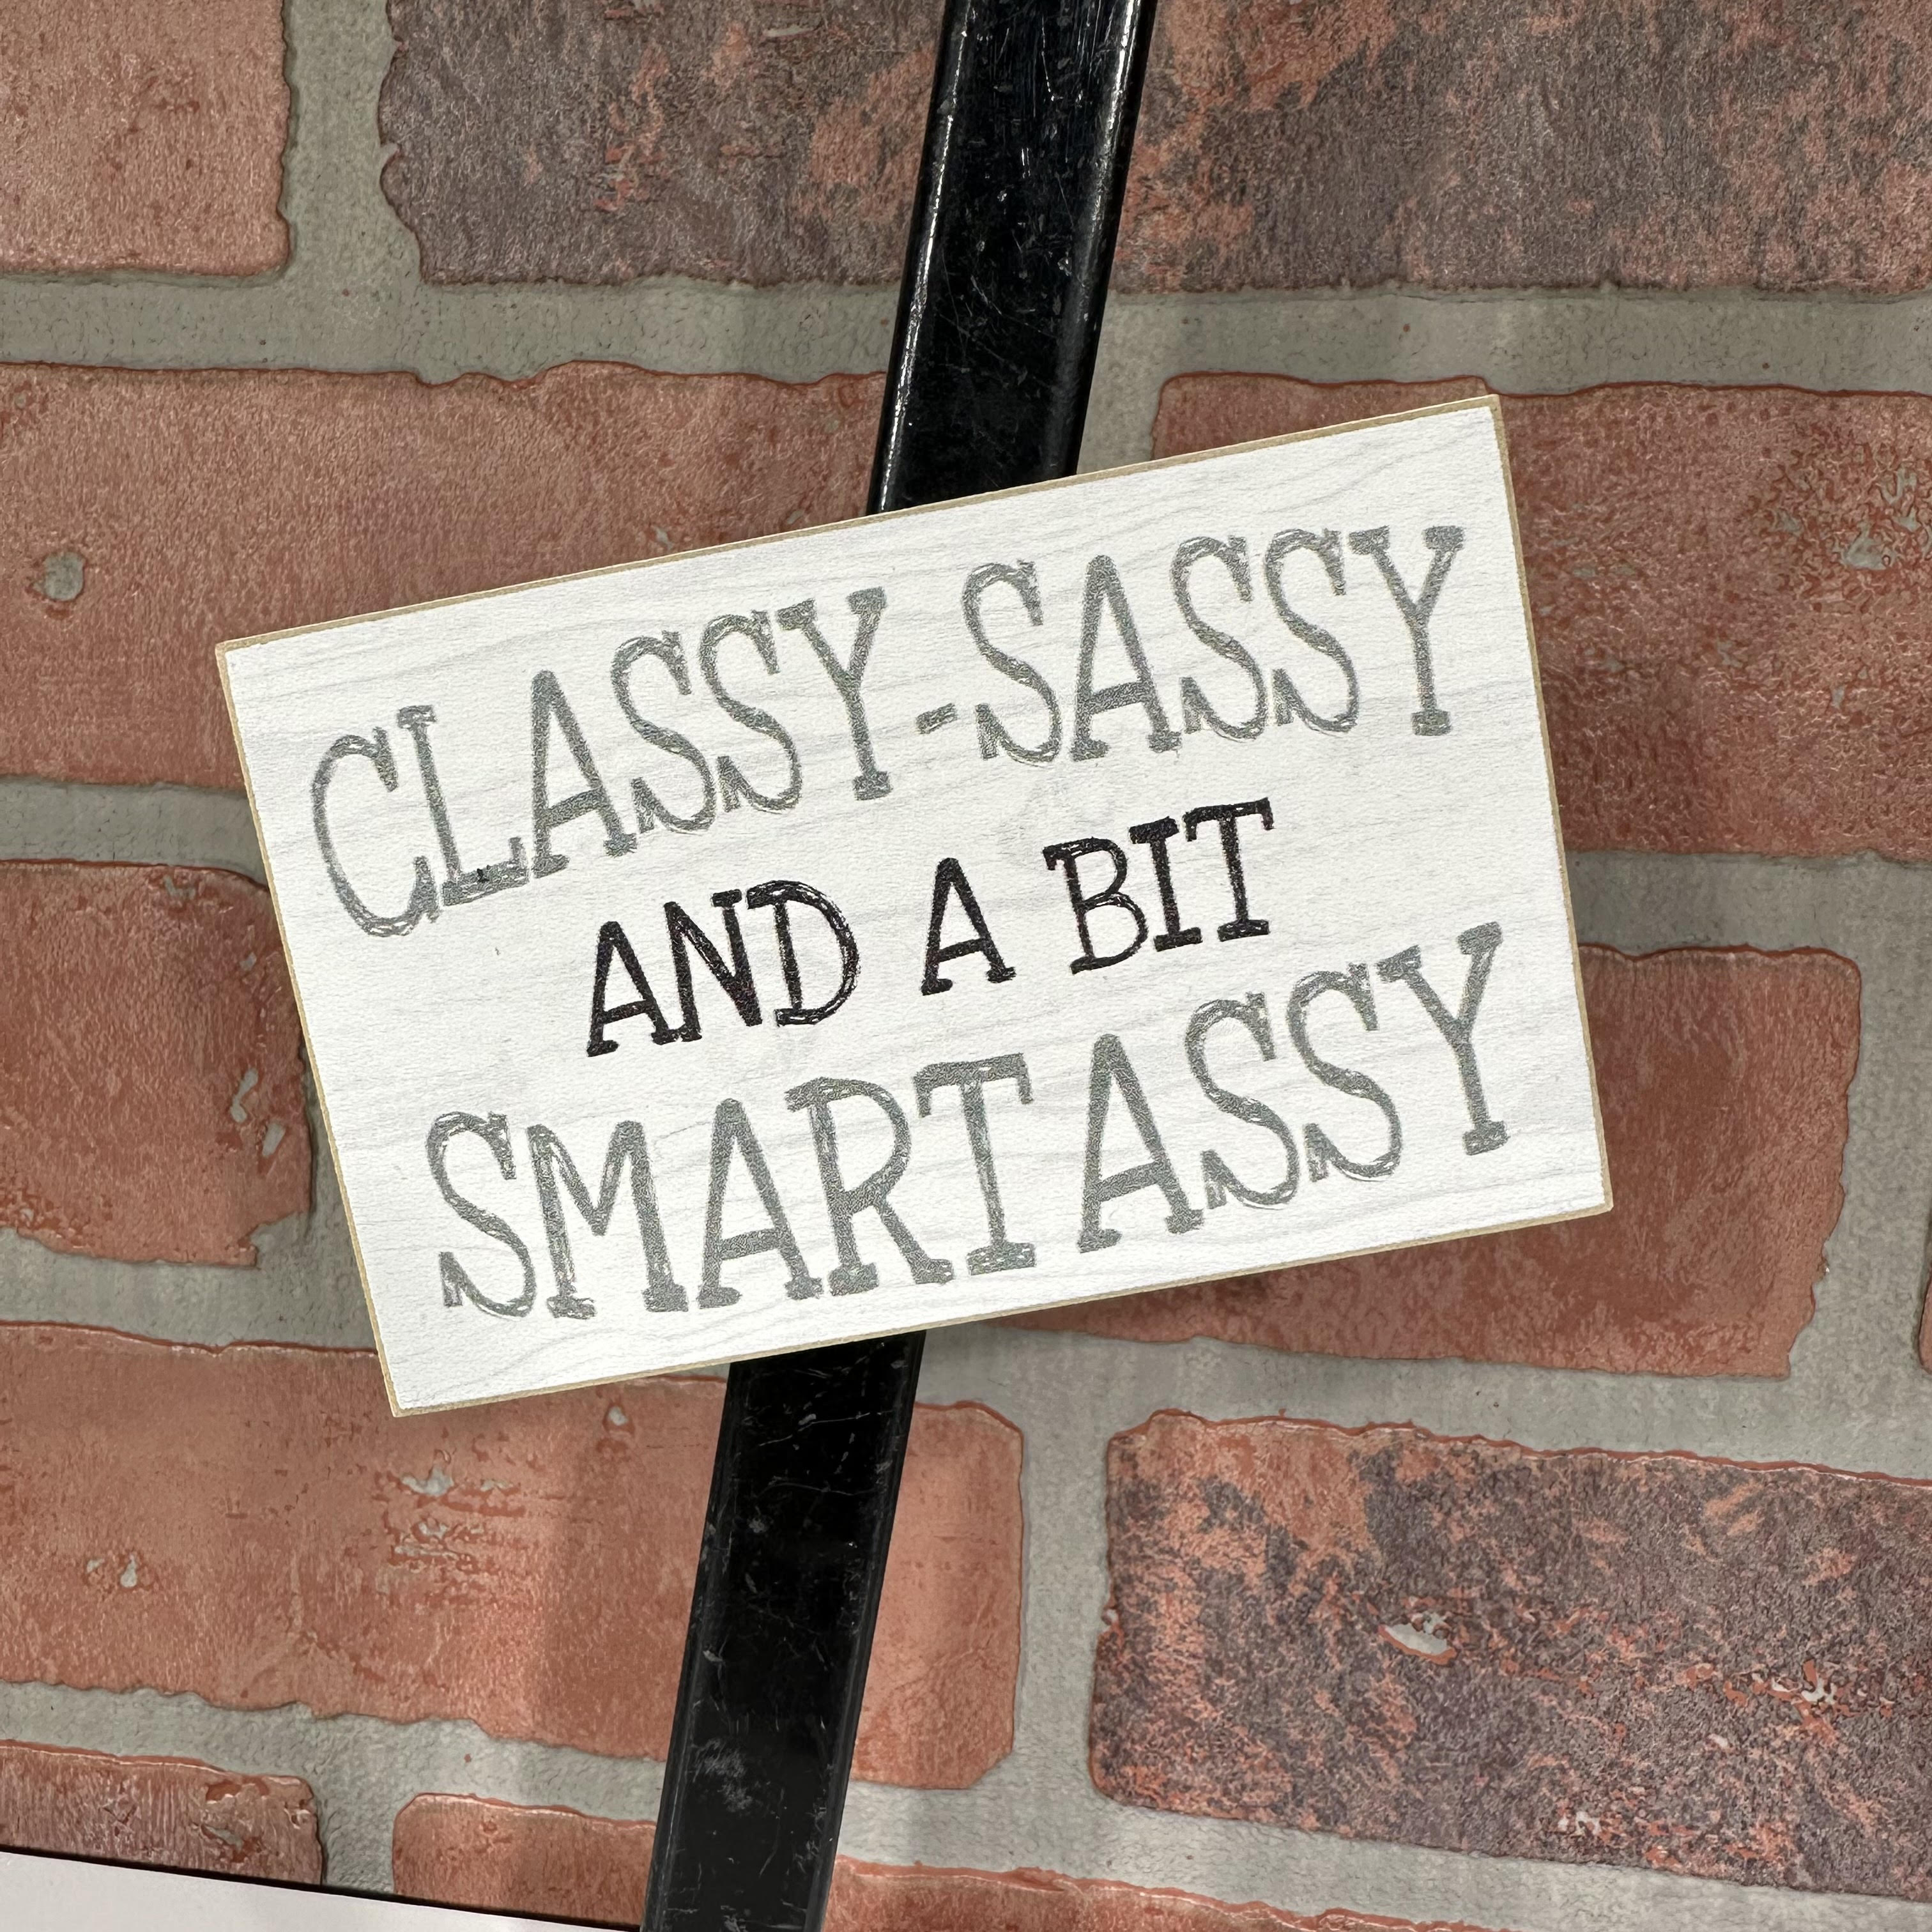 Classy Sassy and a bit Smart Assy 3in X 4.5in Magnet-hotRAGS.com